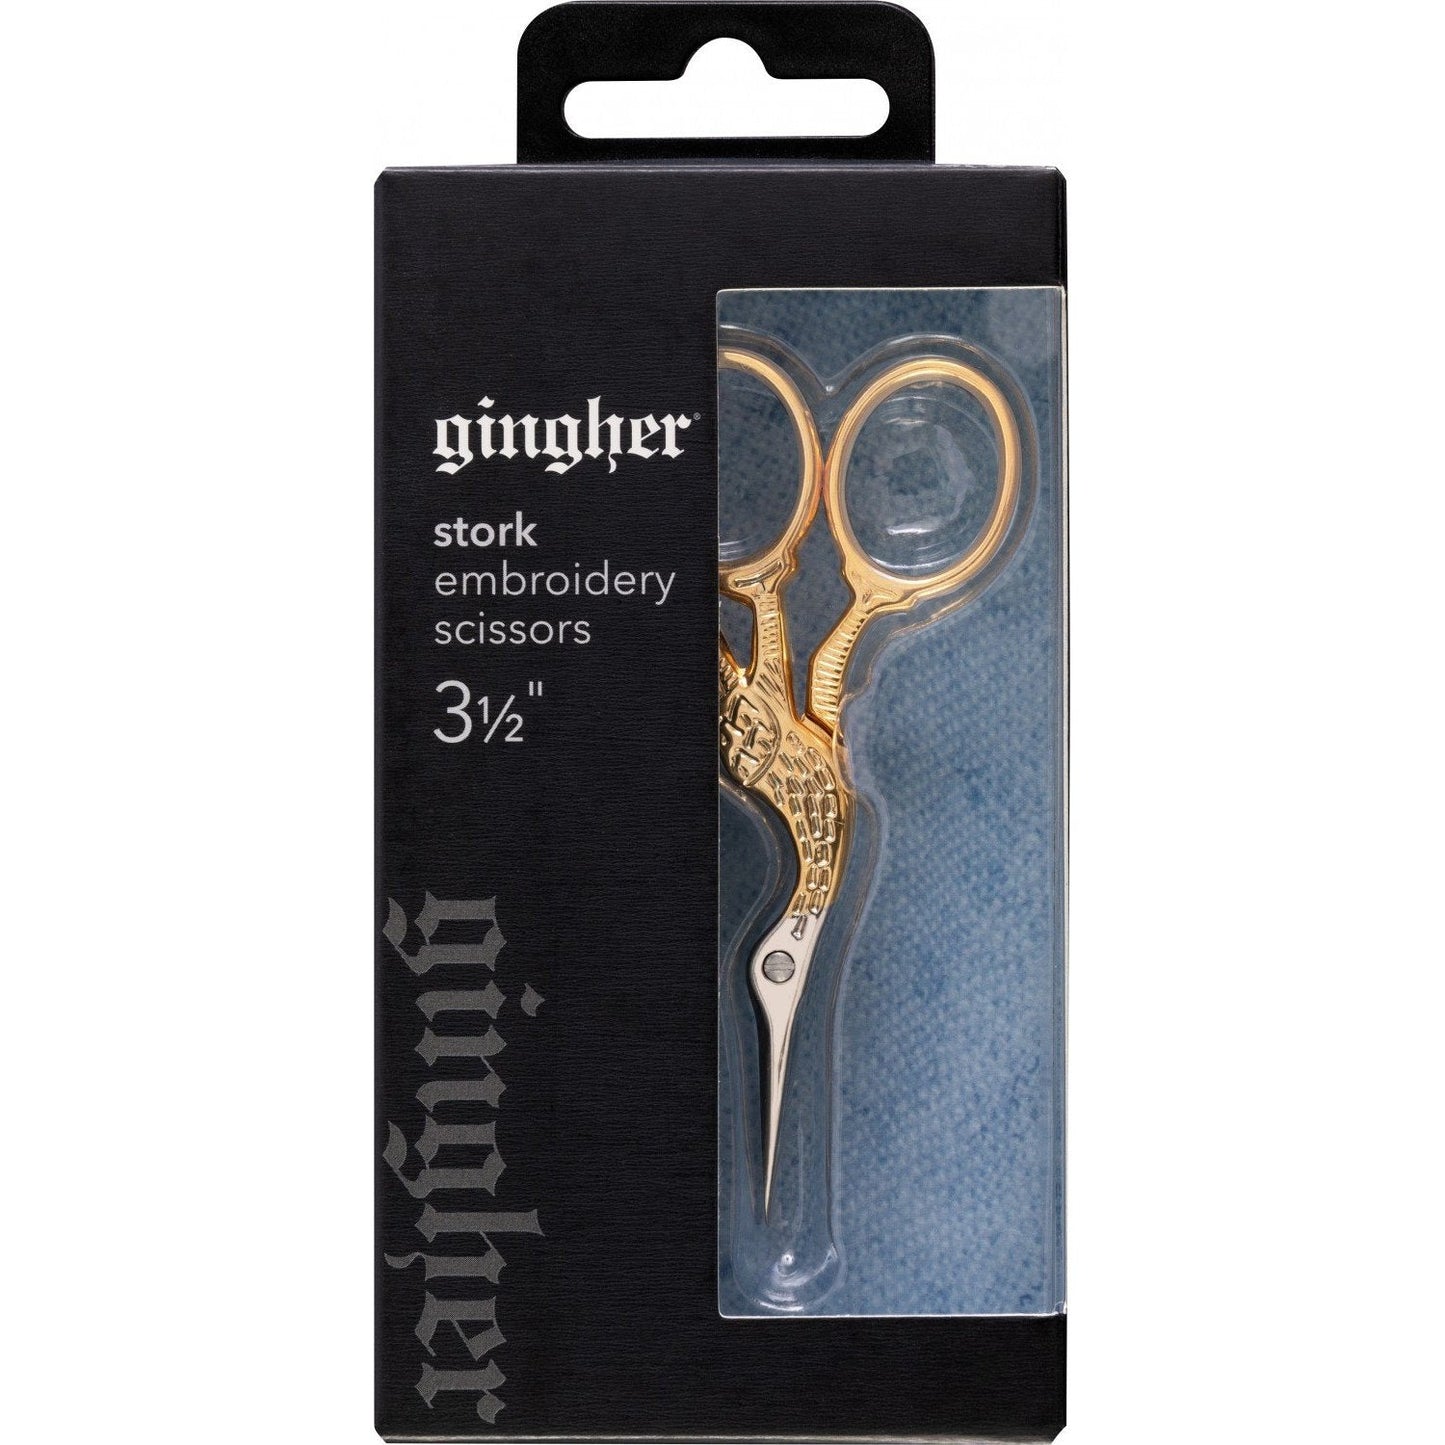 Gingher 3.5" Stork Embroidery Scissors